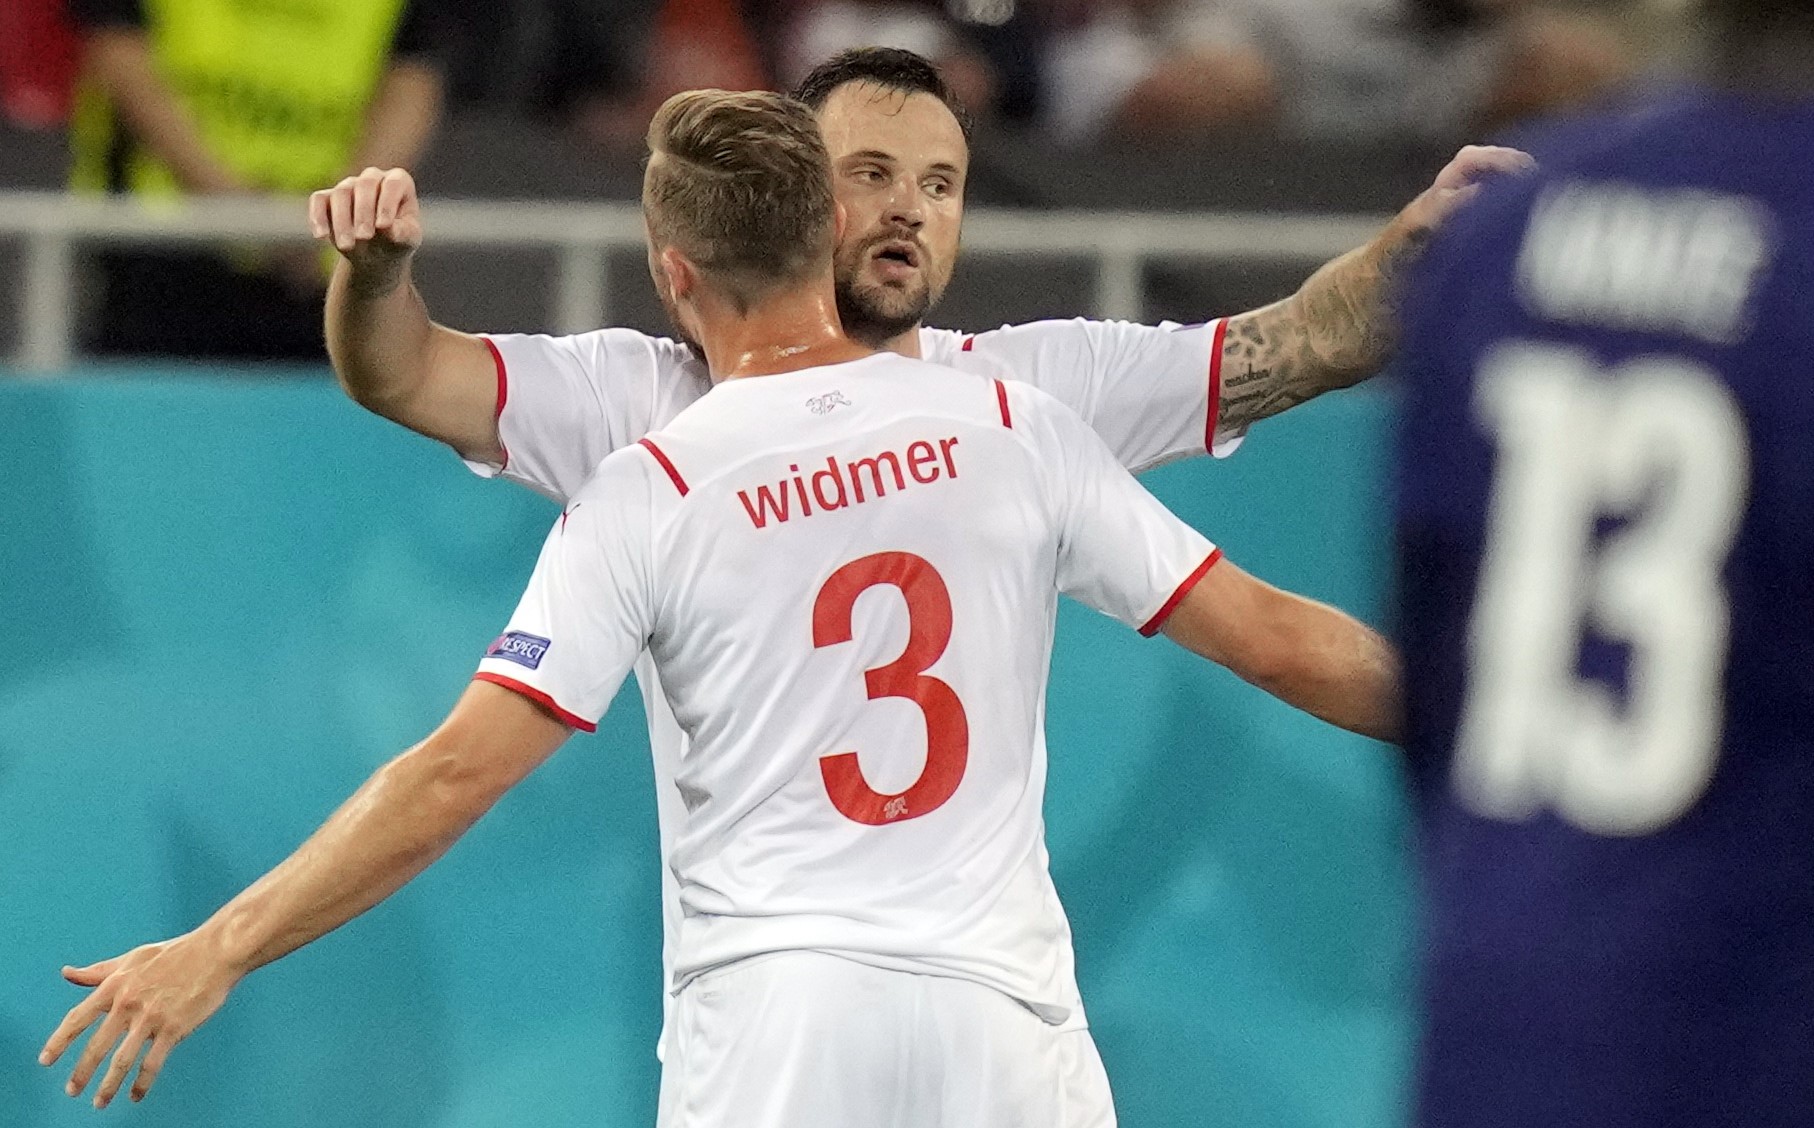 epa09309360 Haris Seferovic (R) of Switzerland celebrates with team-mate Silvan Widmer after scoring the 0-1 goal during the UEFA EURO 2020 round of 16 soccer match between France and Switzerland in Bucharest, Romania, 28 June 2021.  EPA/Vadim Ghirda / POOL (RESTRICTIONS: For editorial news reporting purposes only. Images must appear as still images and must not emulate match action video footage. Photographs published in online publications shall have an interval of at least 20 seconds between the posting.)